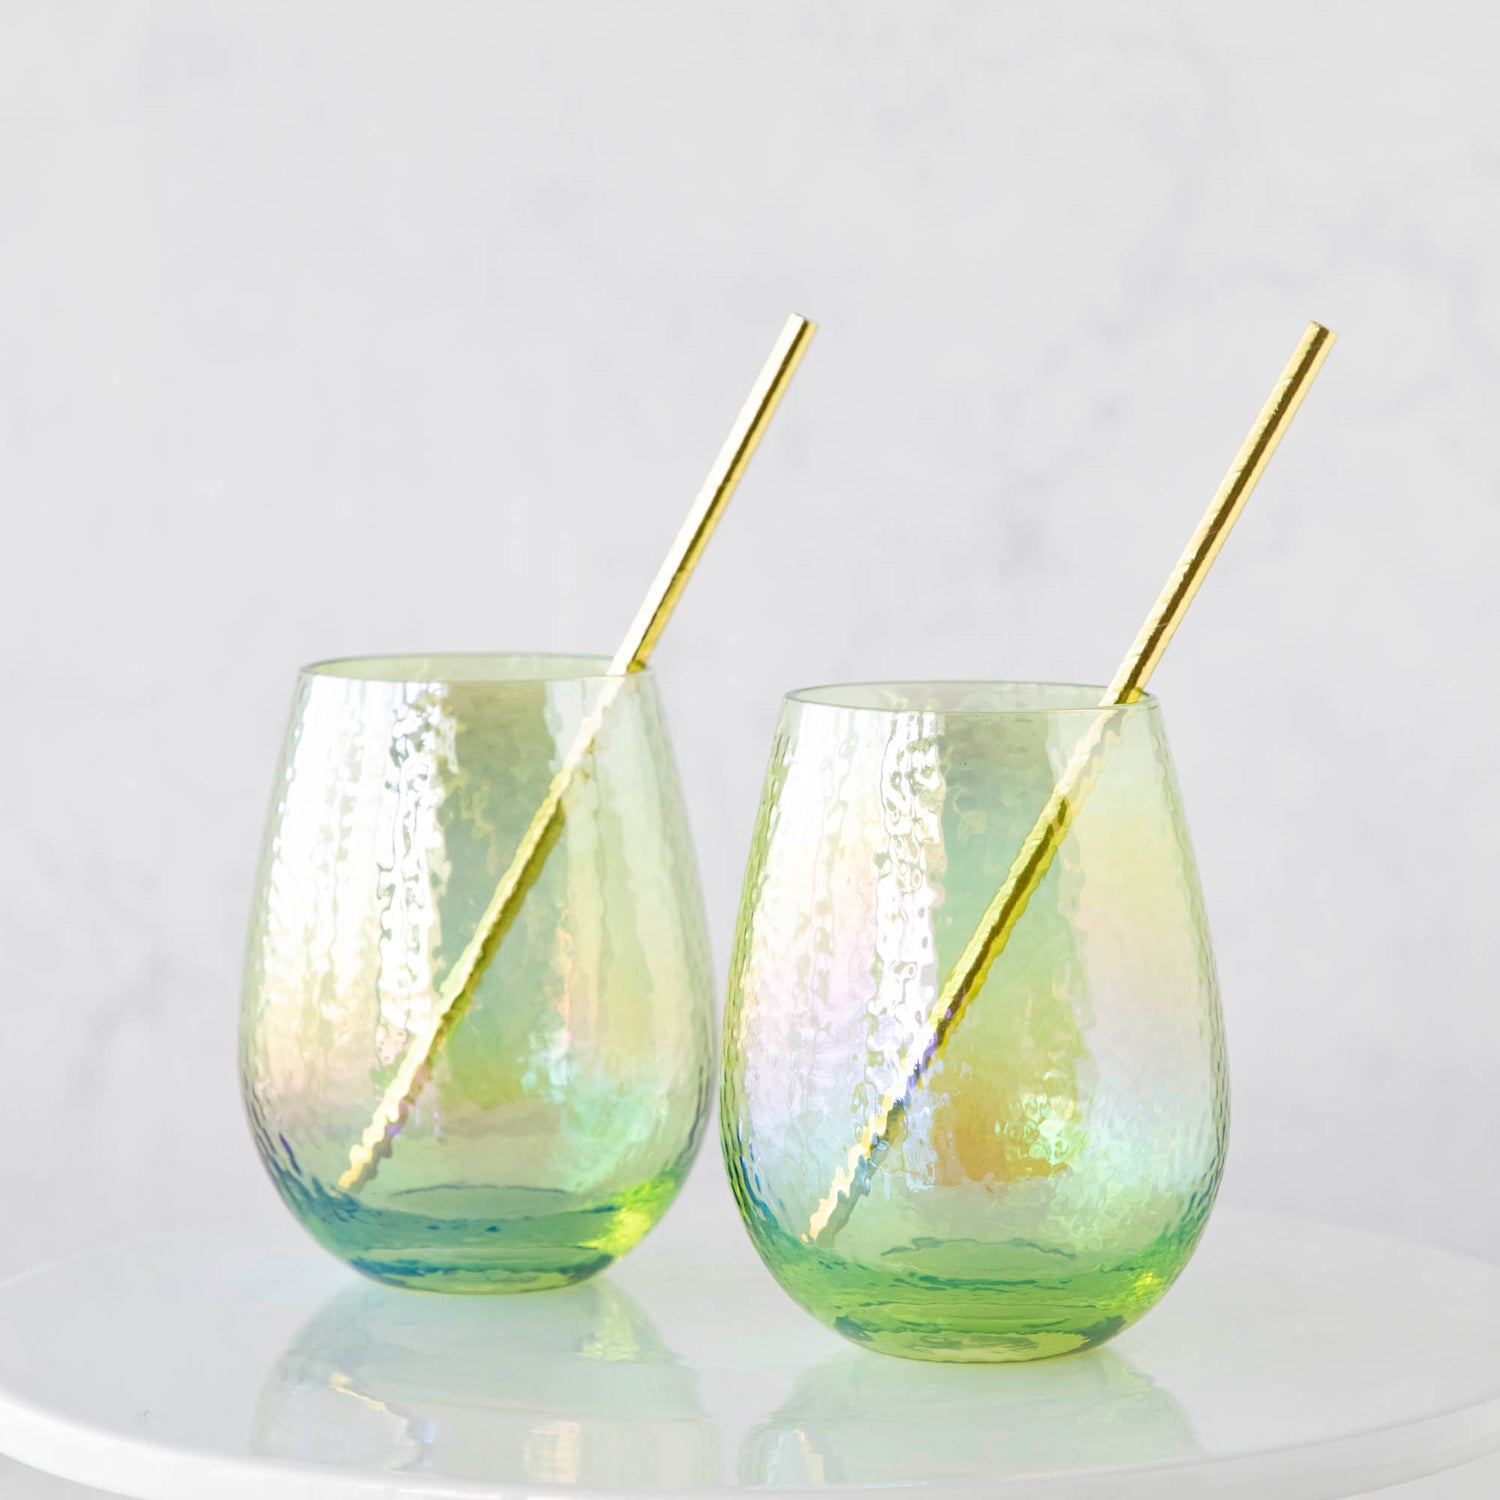 Two Luster Stemless Glassware with gold straws on a white plate. (Brand: Zodax)